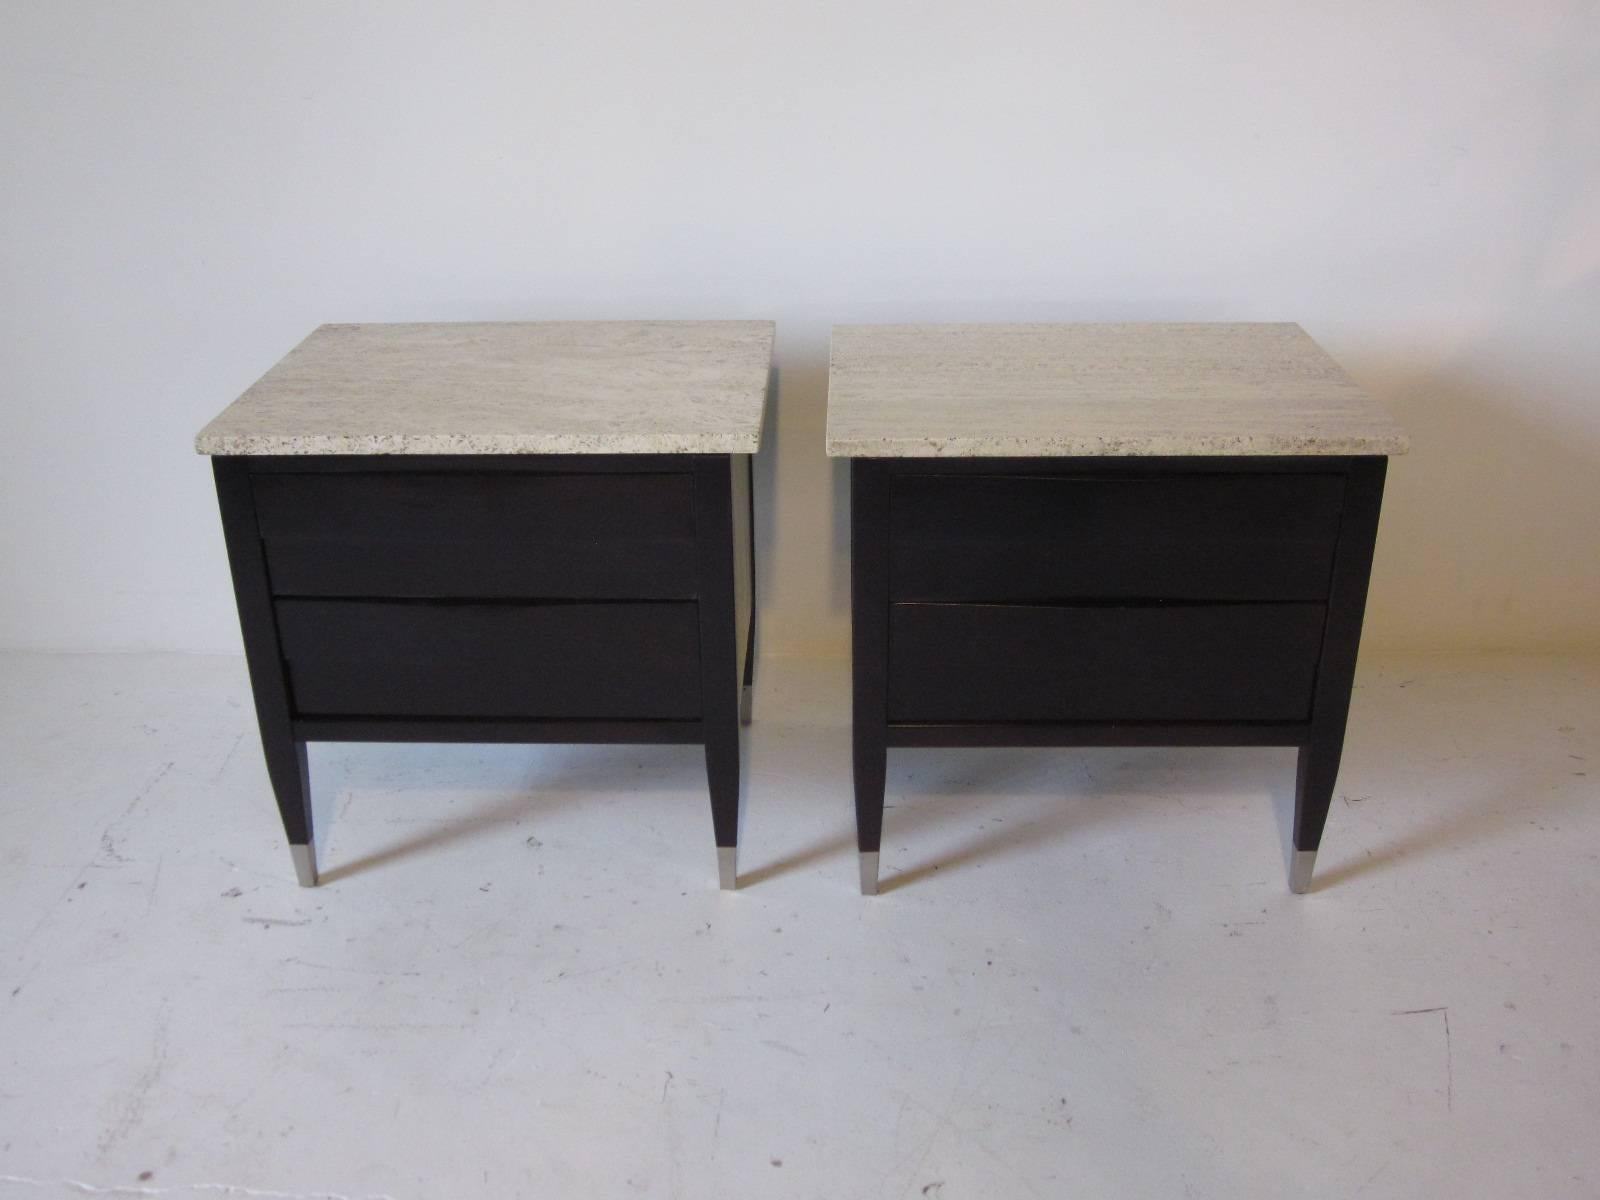 Travertine Marble Topped Nightstands or End Tables by American of Martinsville 2